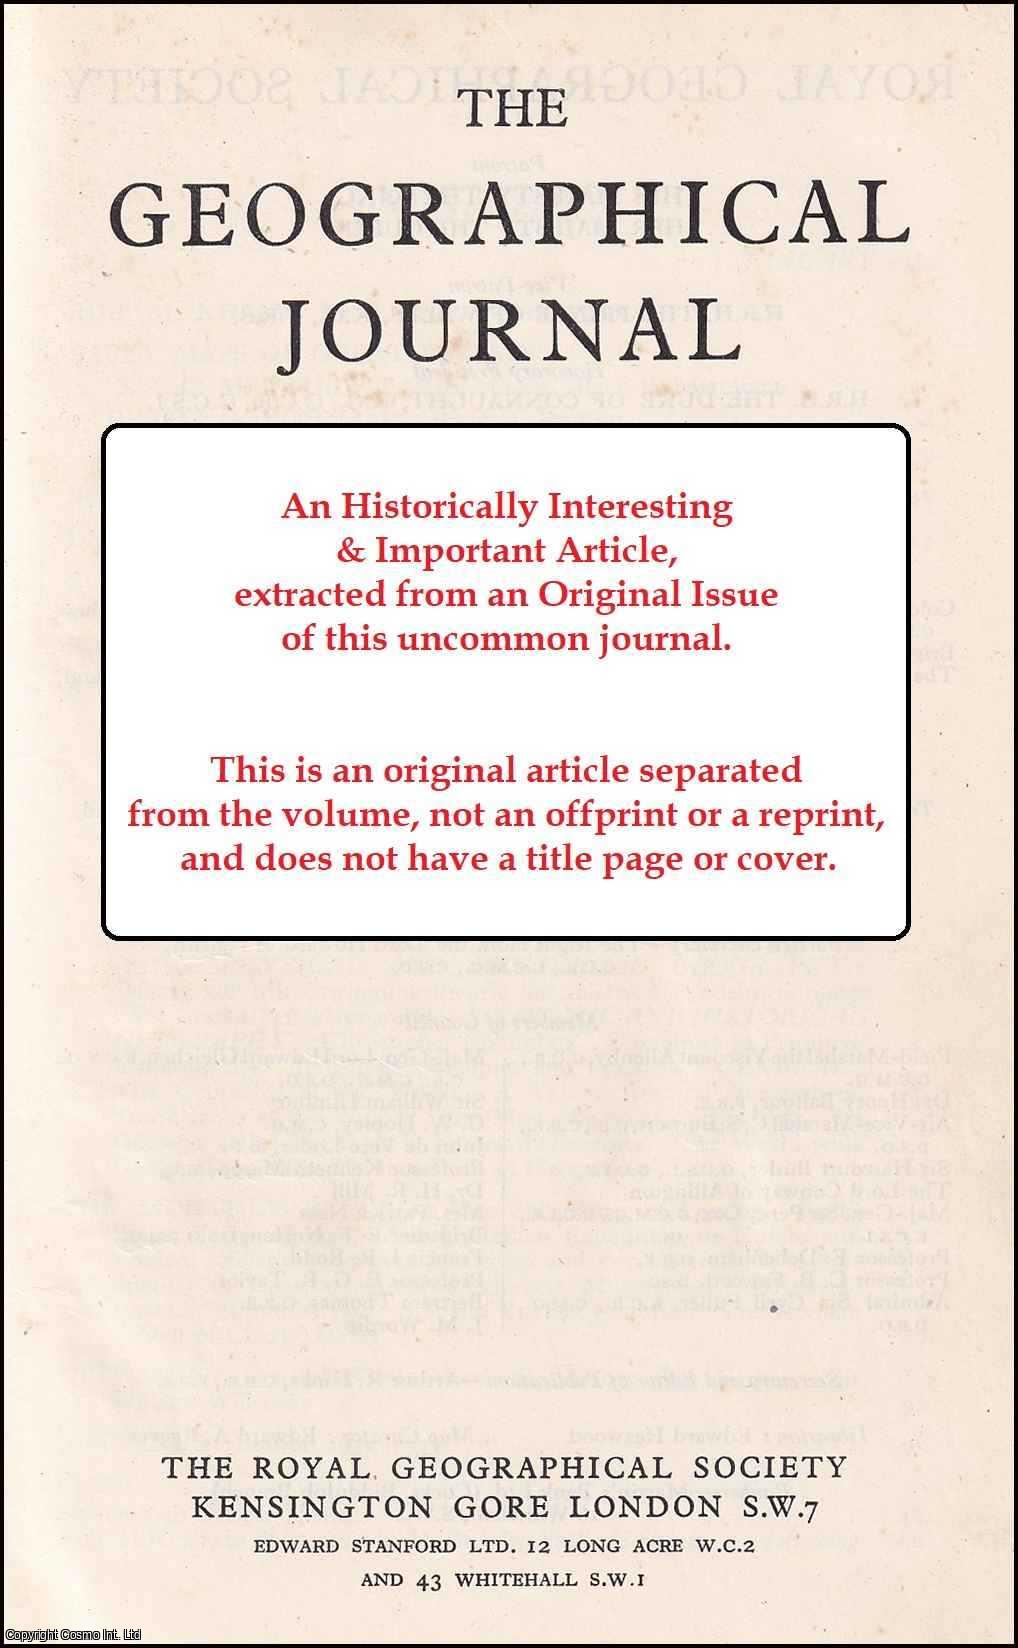 John R. Baker - Rionga's Island: A Note on Samuel Baker's Second Expedition to Central Africa. An original article from the Geographical Journal, 1965.